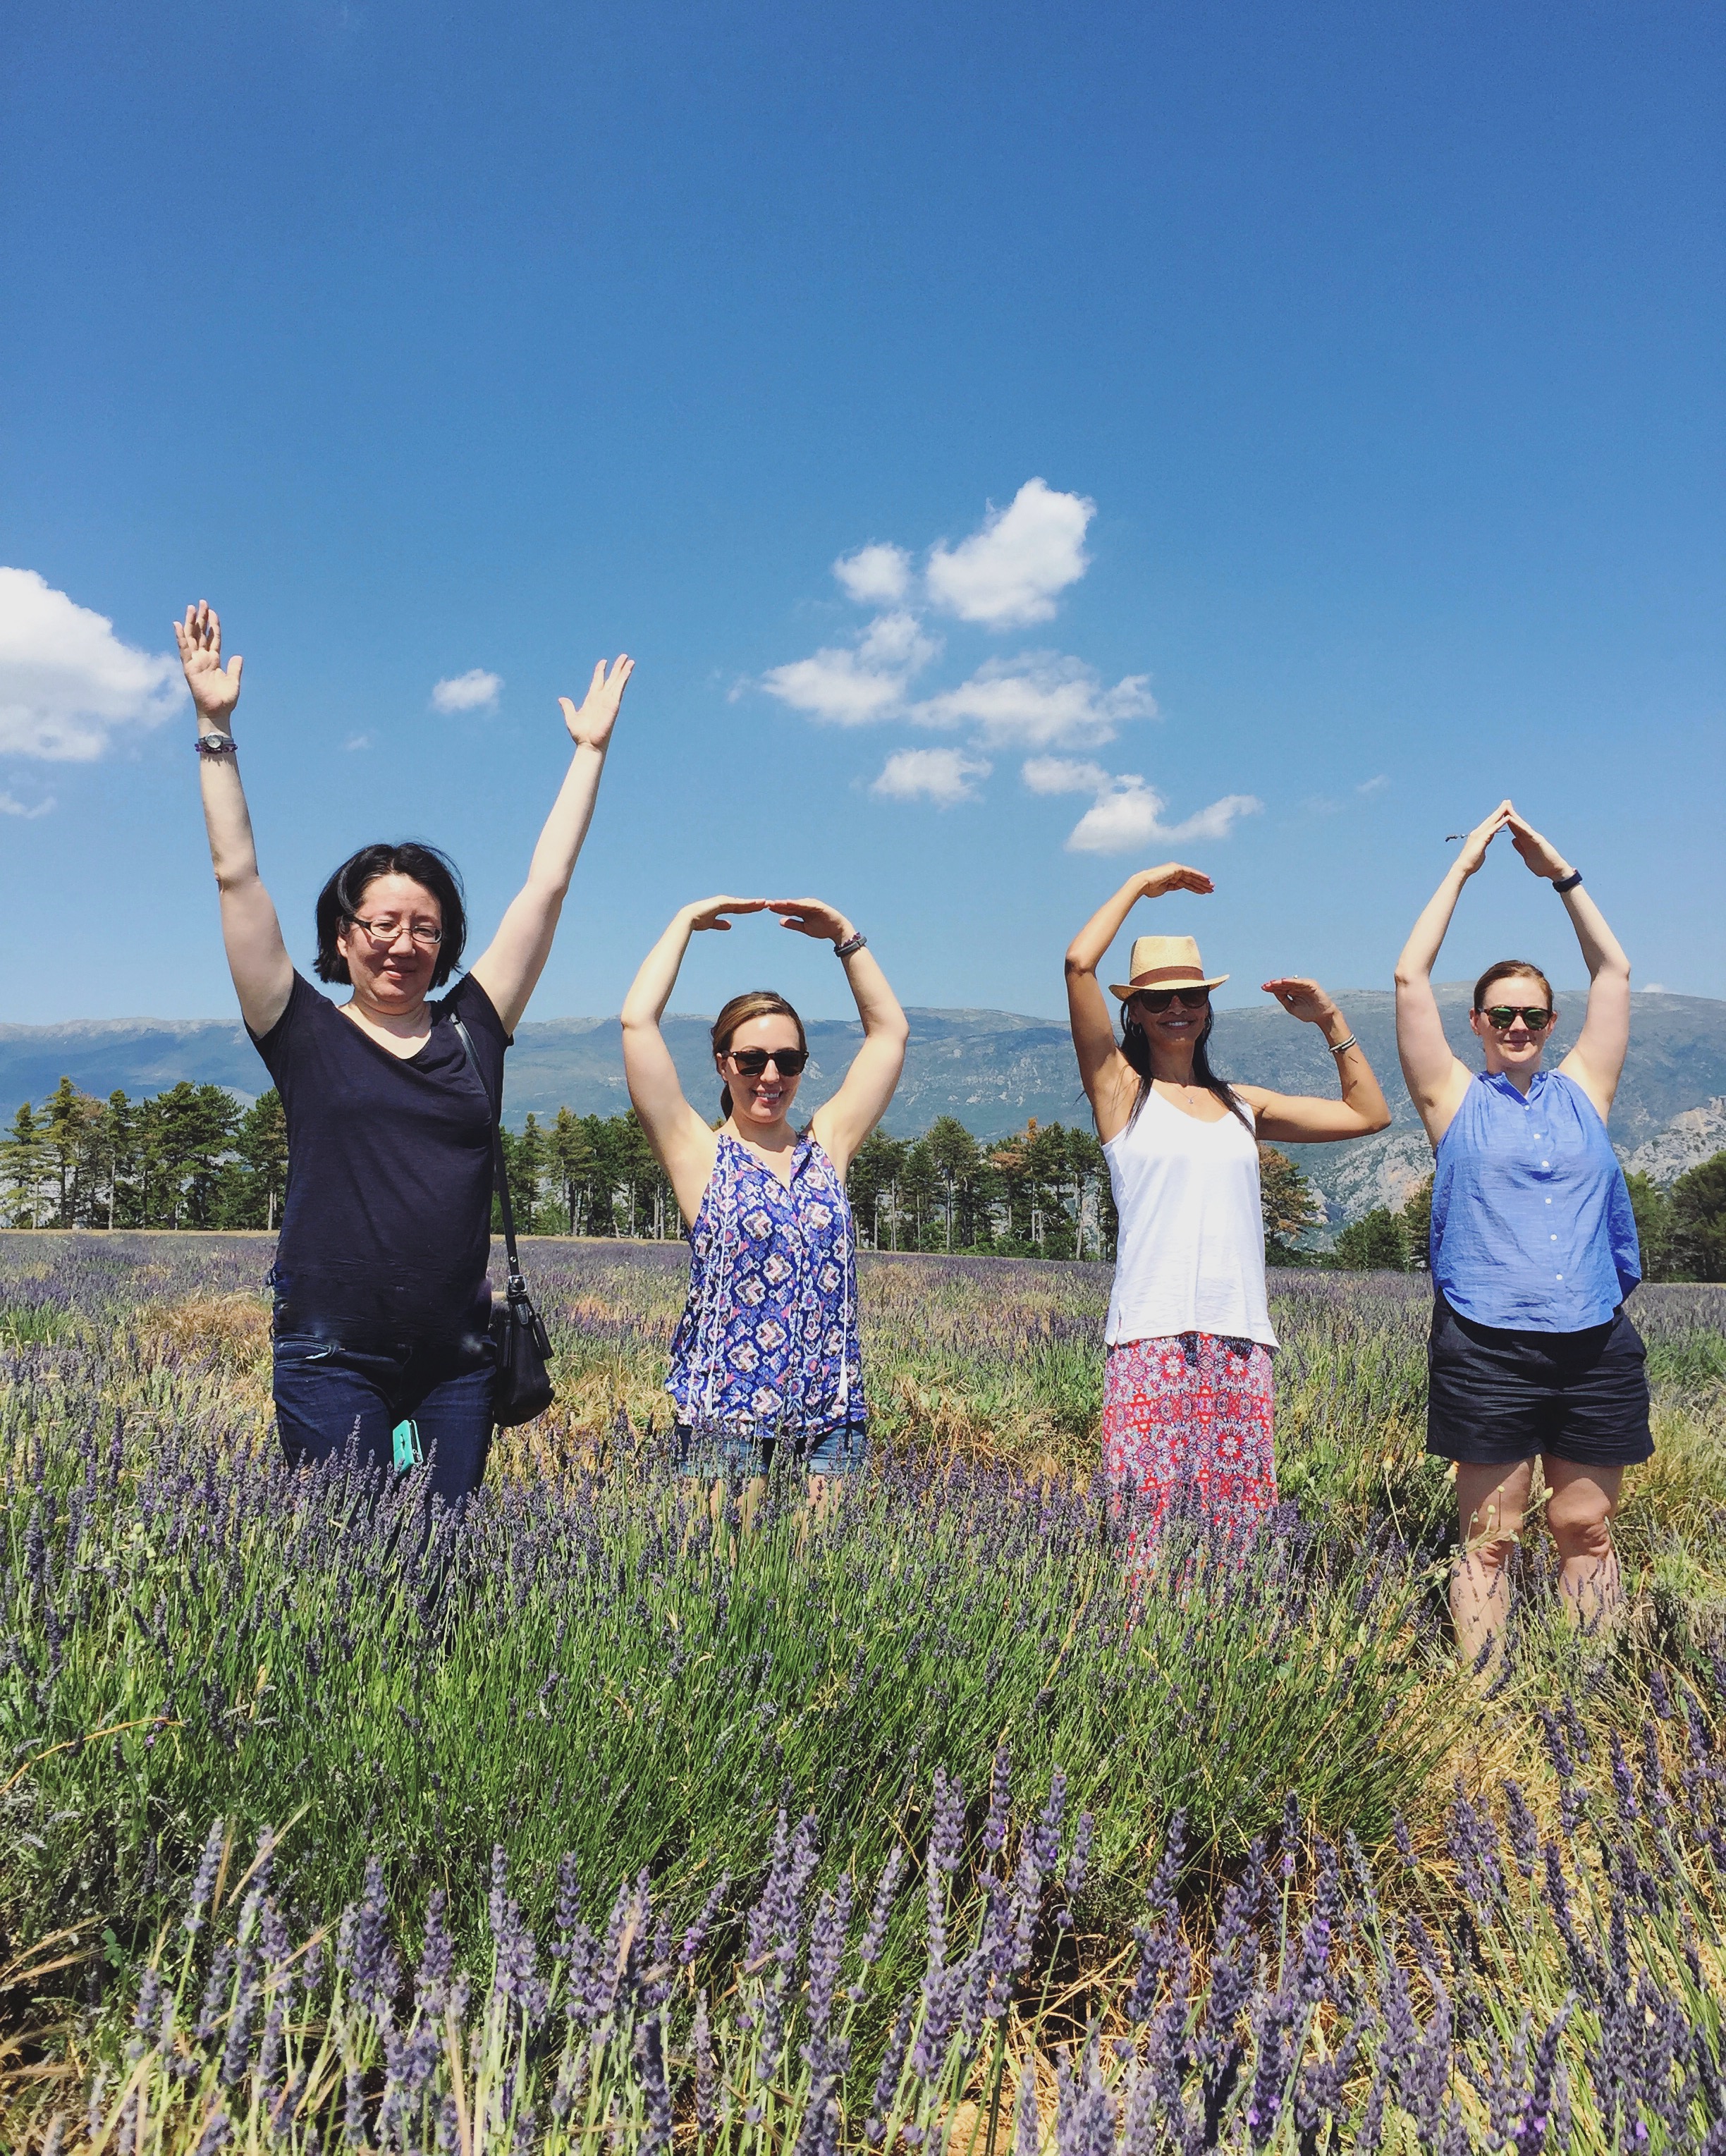 y.o.g.a in lavender | EAT.PRAY.MOVE Yoga Retreats | Provence, France